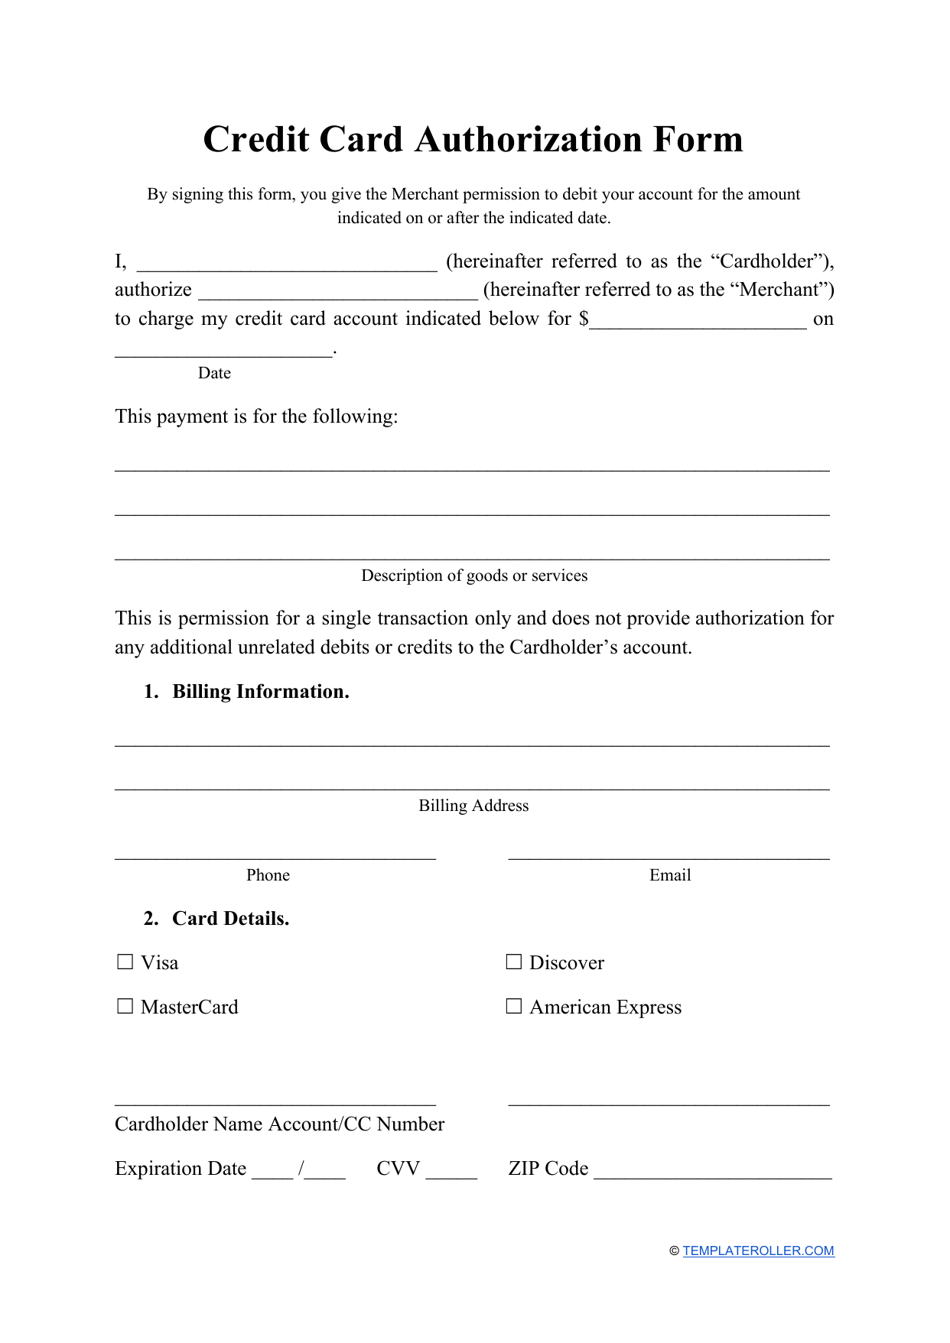 Credit Card Authorization Form, Page 1